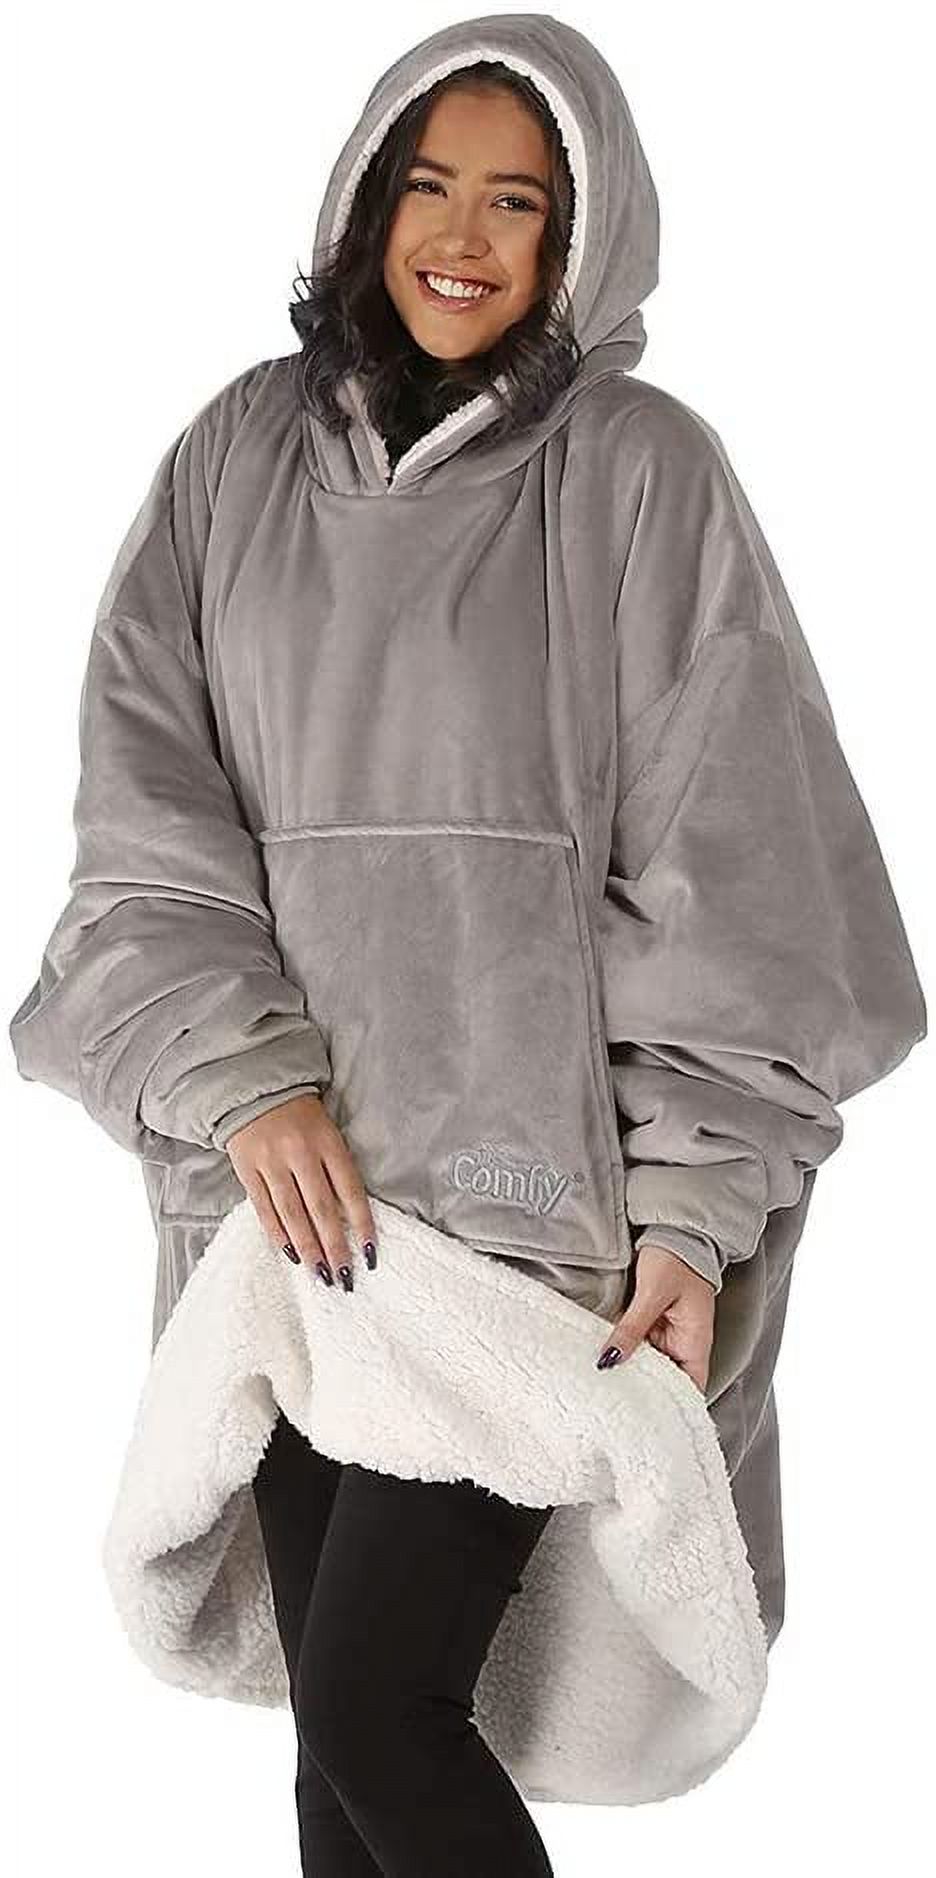 The Comfy Original Oversized Microfiber Wearable Blanket for Adults, Grey - image 4 of 5